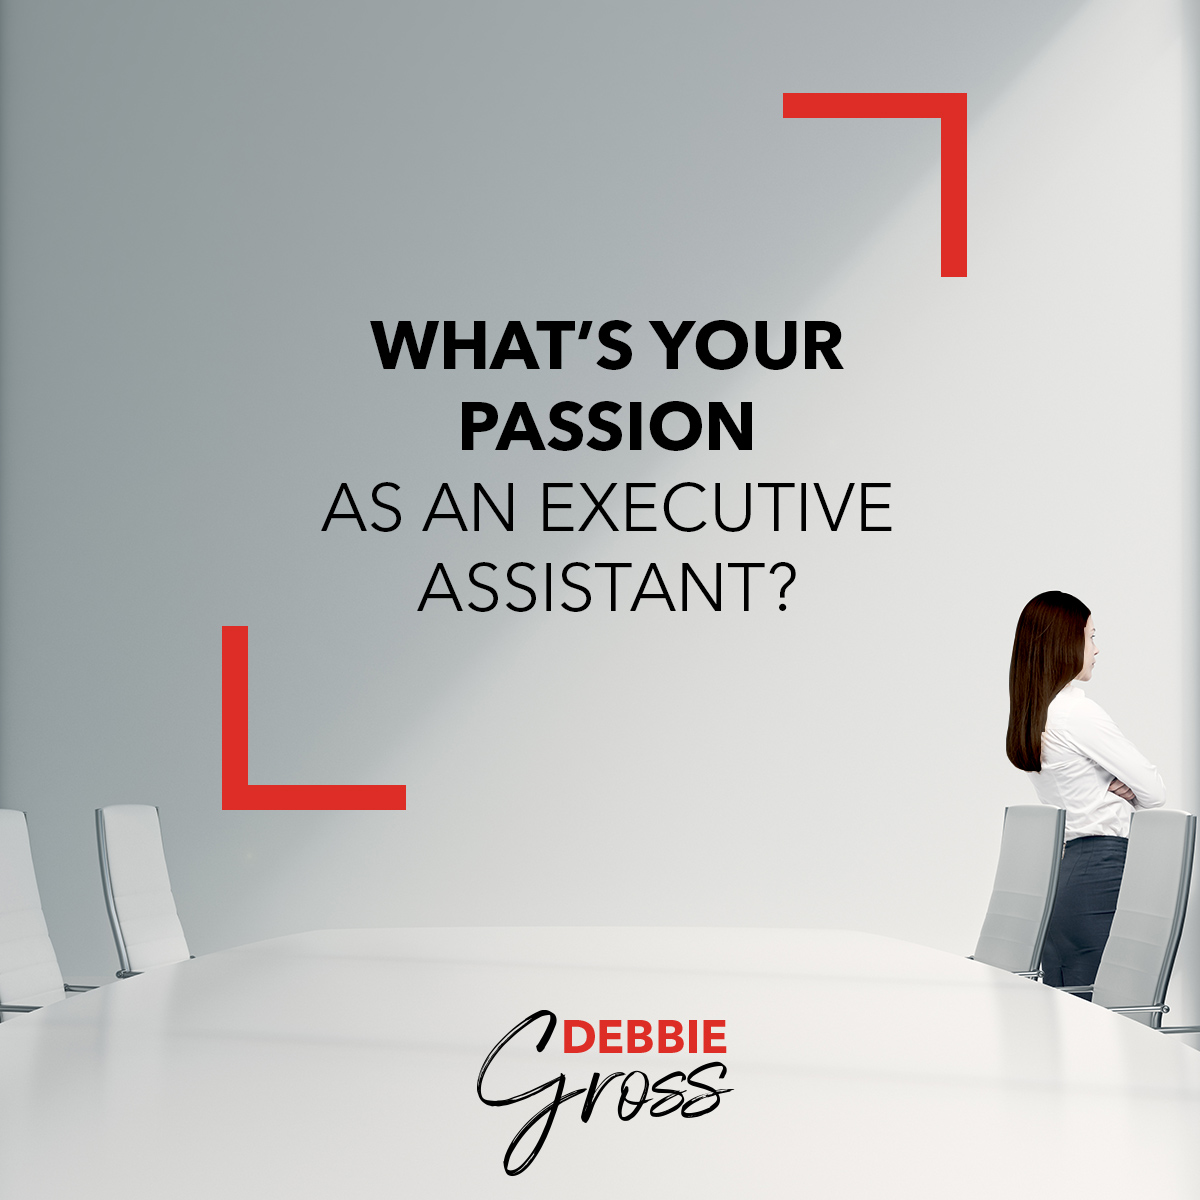 What’s your passion as an executive assistant? I want to know.

#executiveassistant #workfromhome #personalgrowth #administrativeassistant #executiveassistants #onlinebusinesssupport #businesssupport #resumerevamp #resumeservices #resumewhisperer